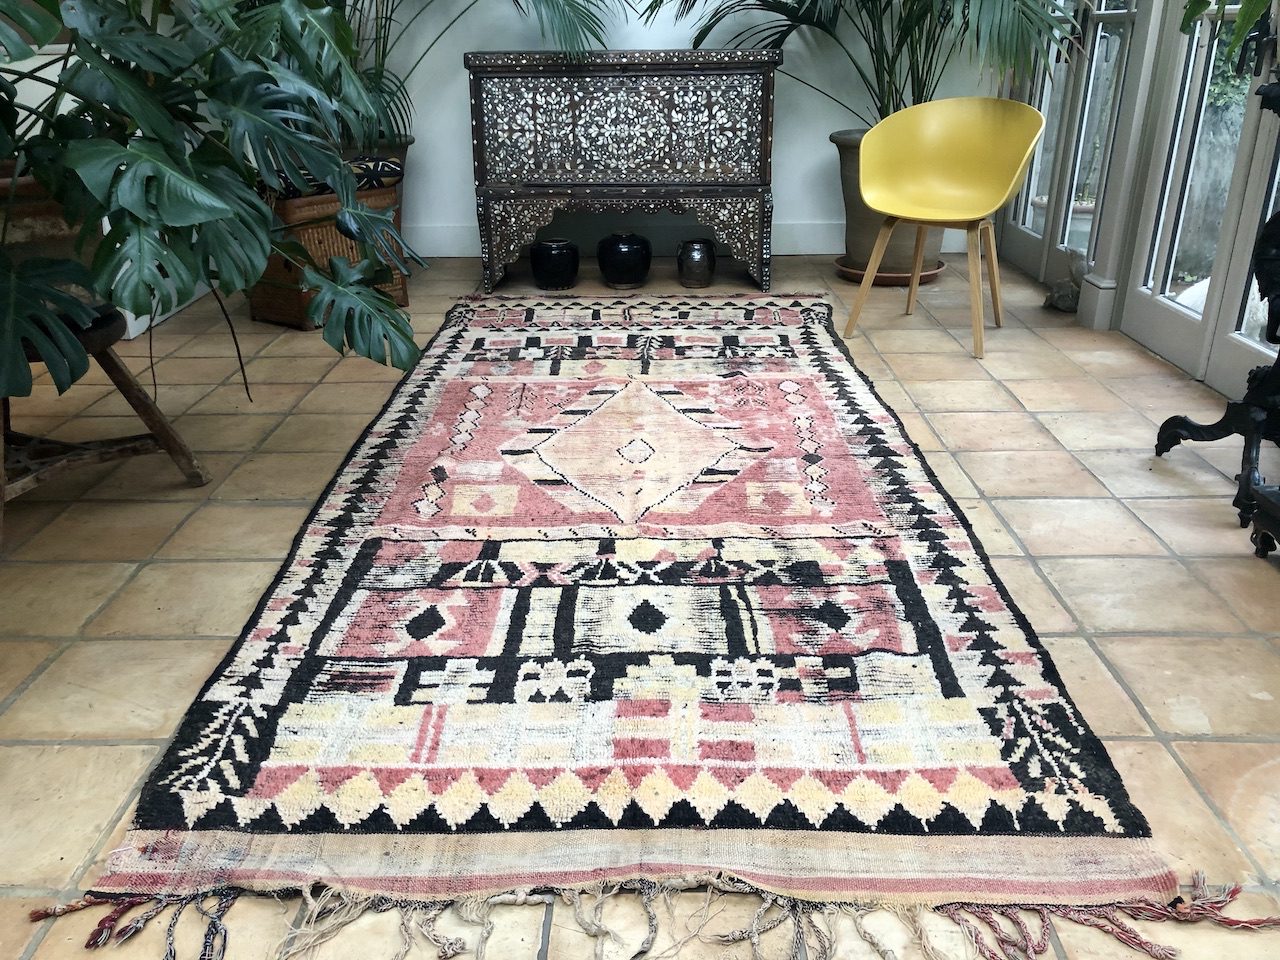 Antique Moroccan Berber Rug Emily S, Large Moroccan Rug